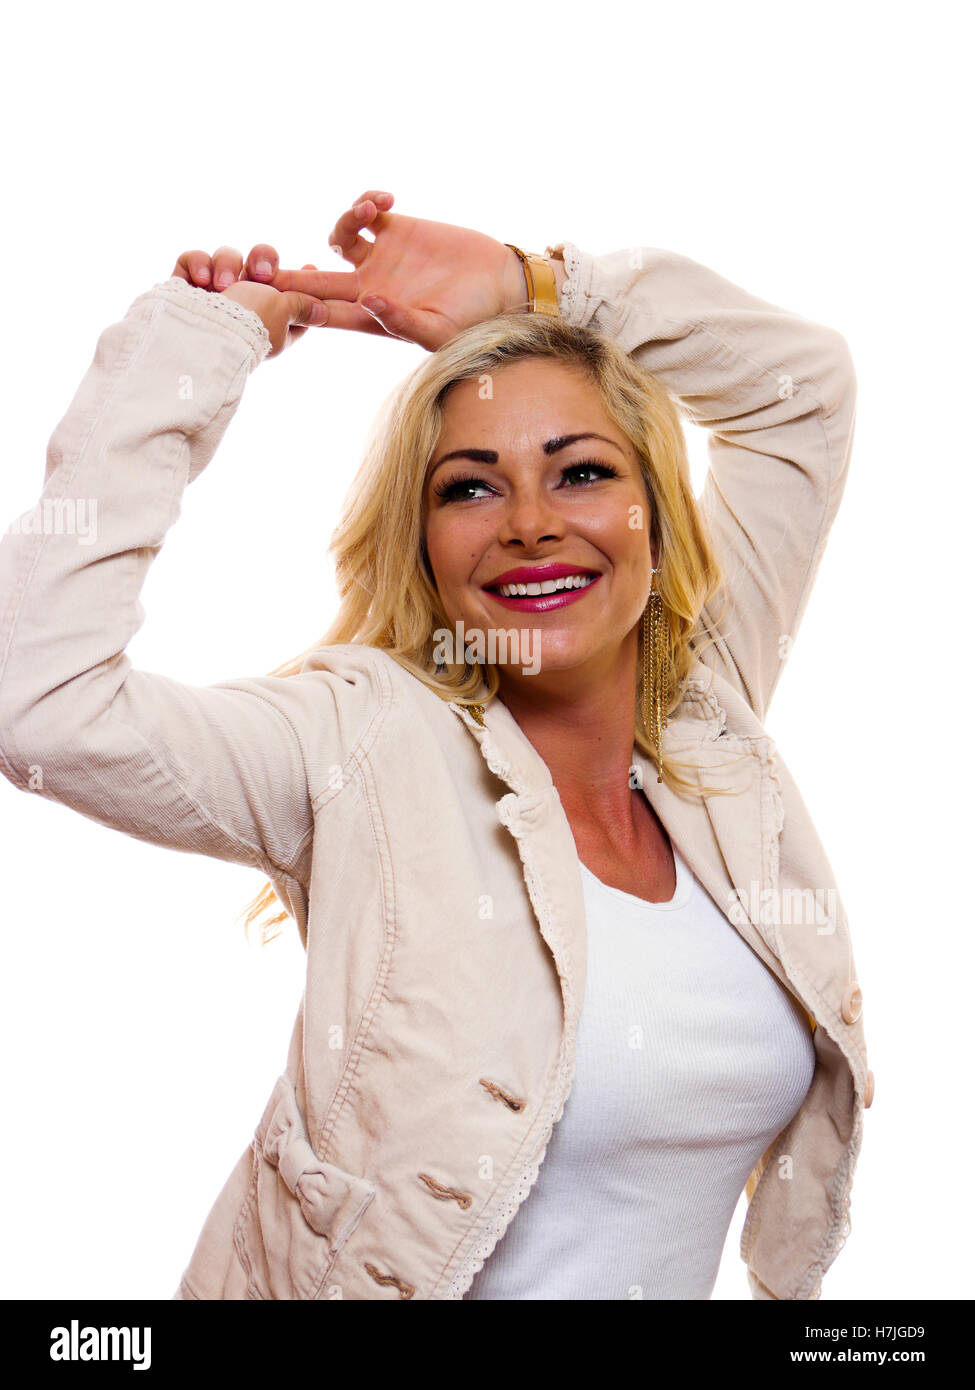 Image of a happy smiling woman with hands up over her head. Stock Photo